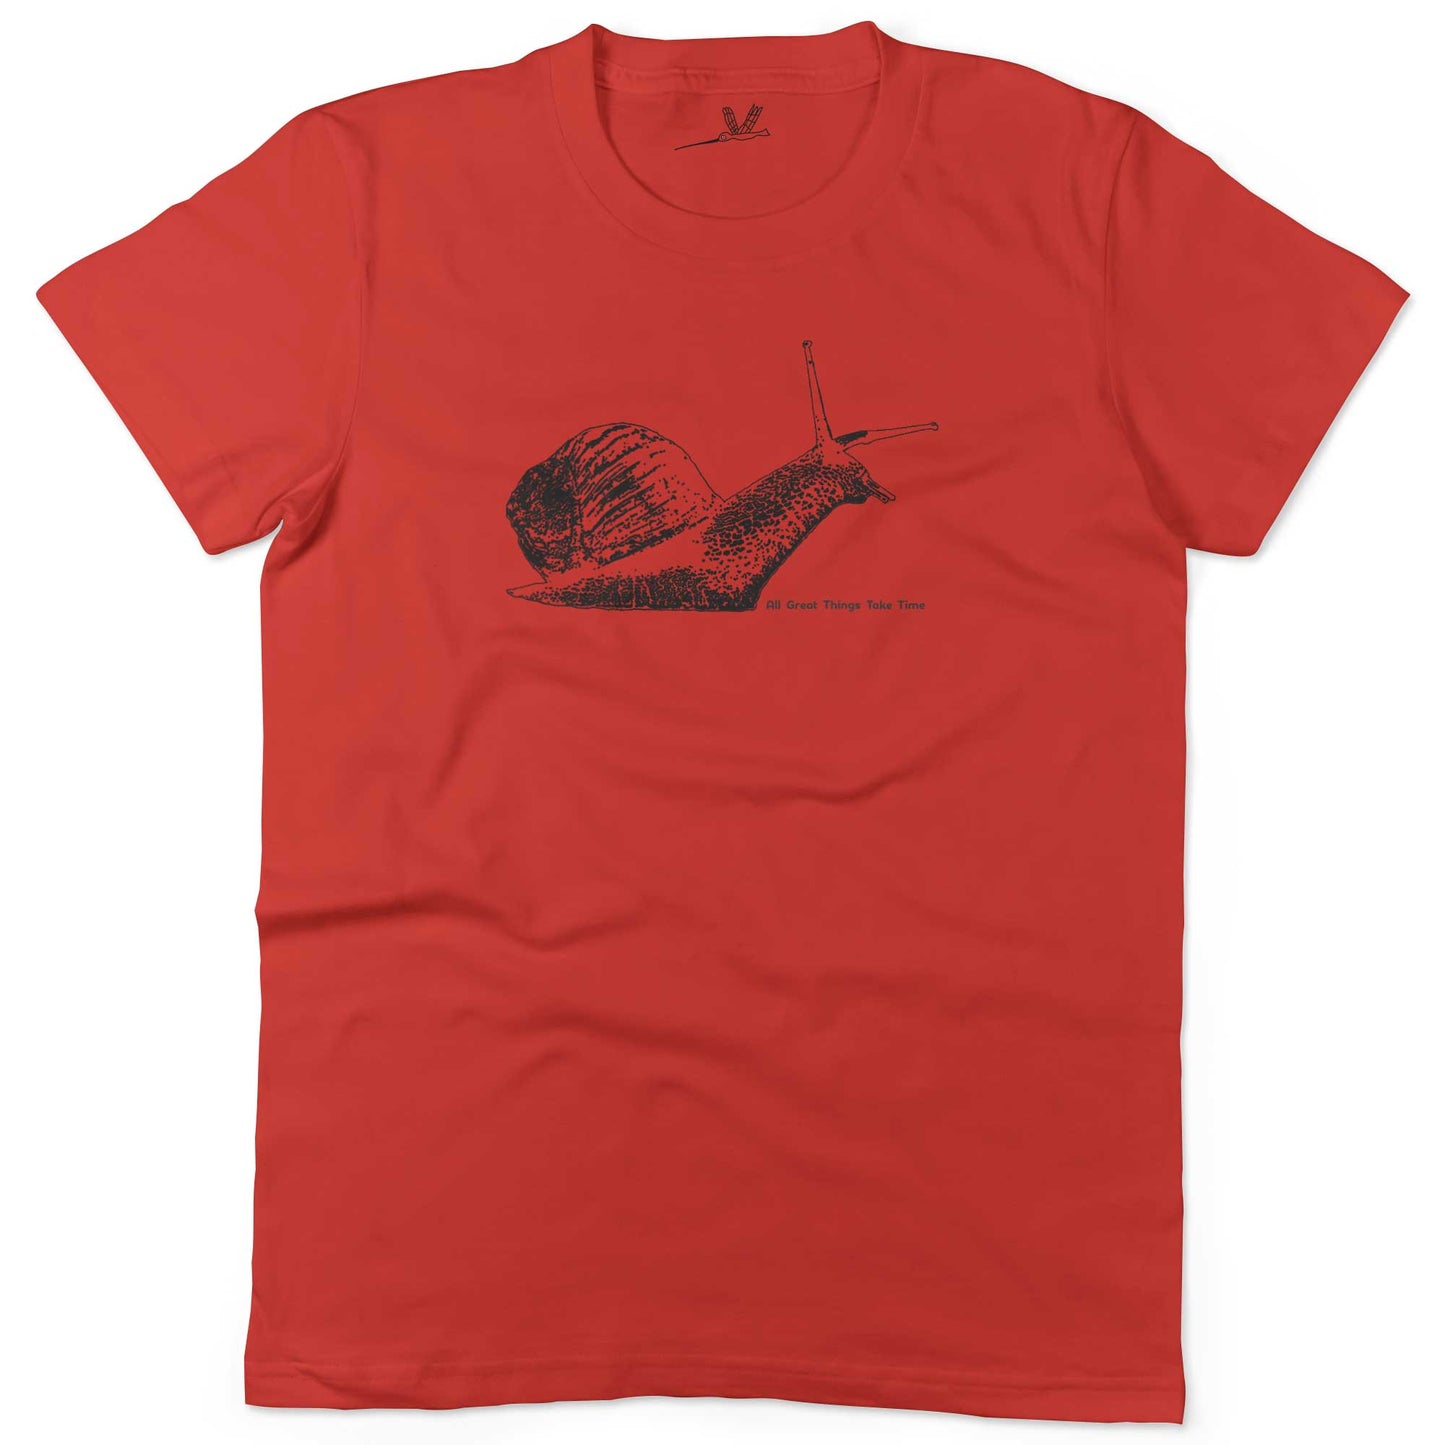 All Great Things Take Time Unisex Or Women's Cotton T-shirt-Red-Woman